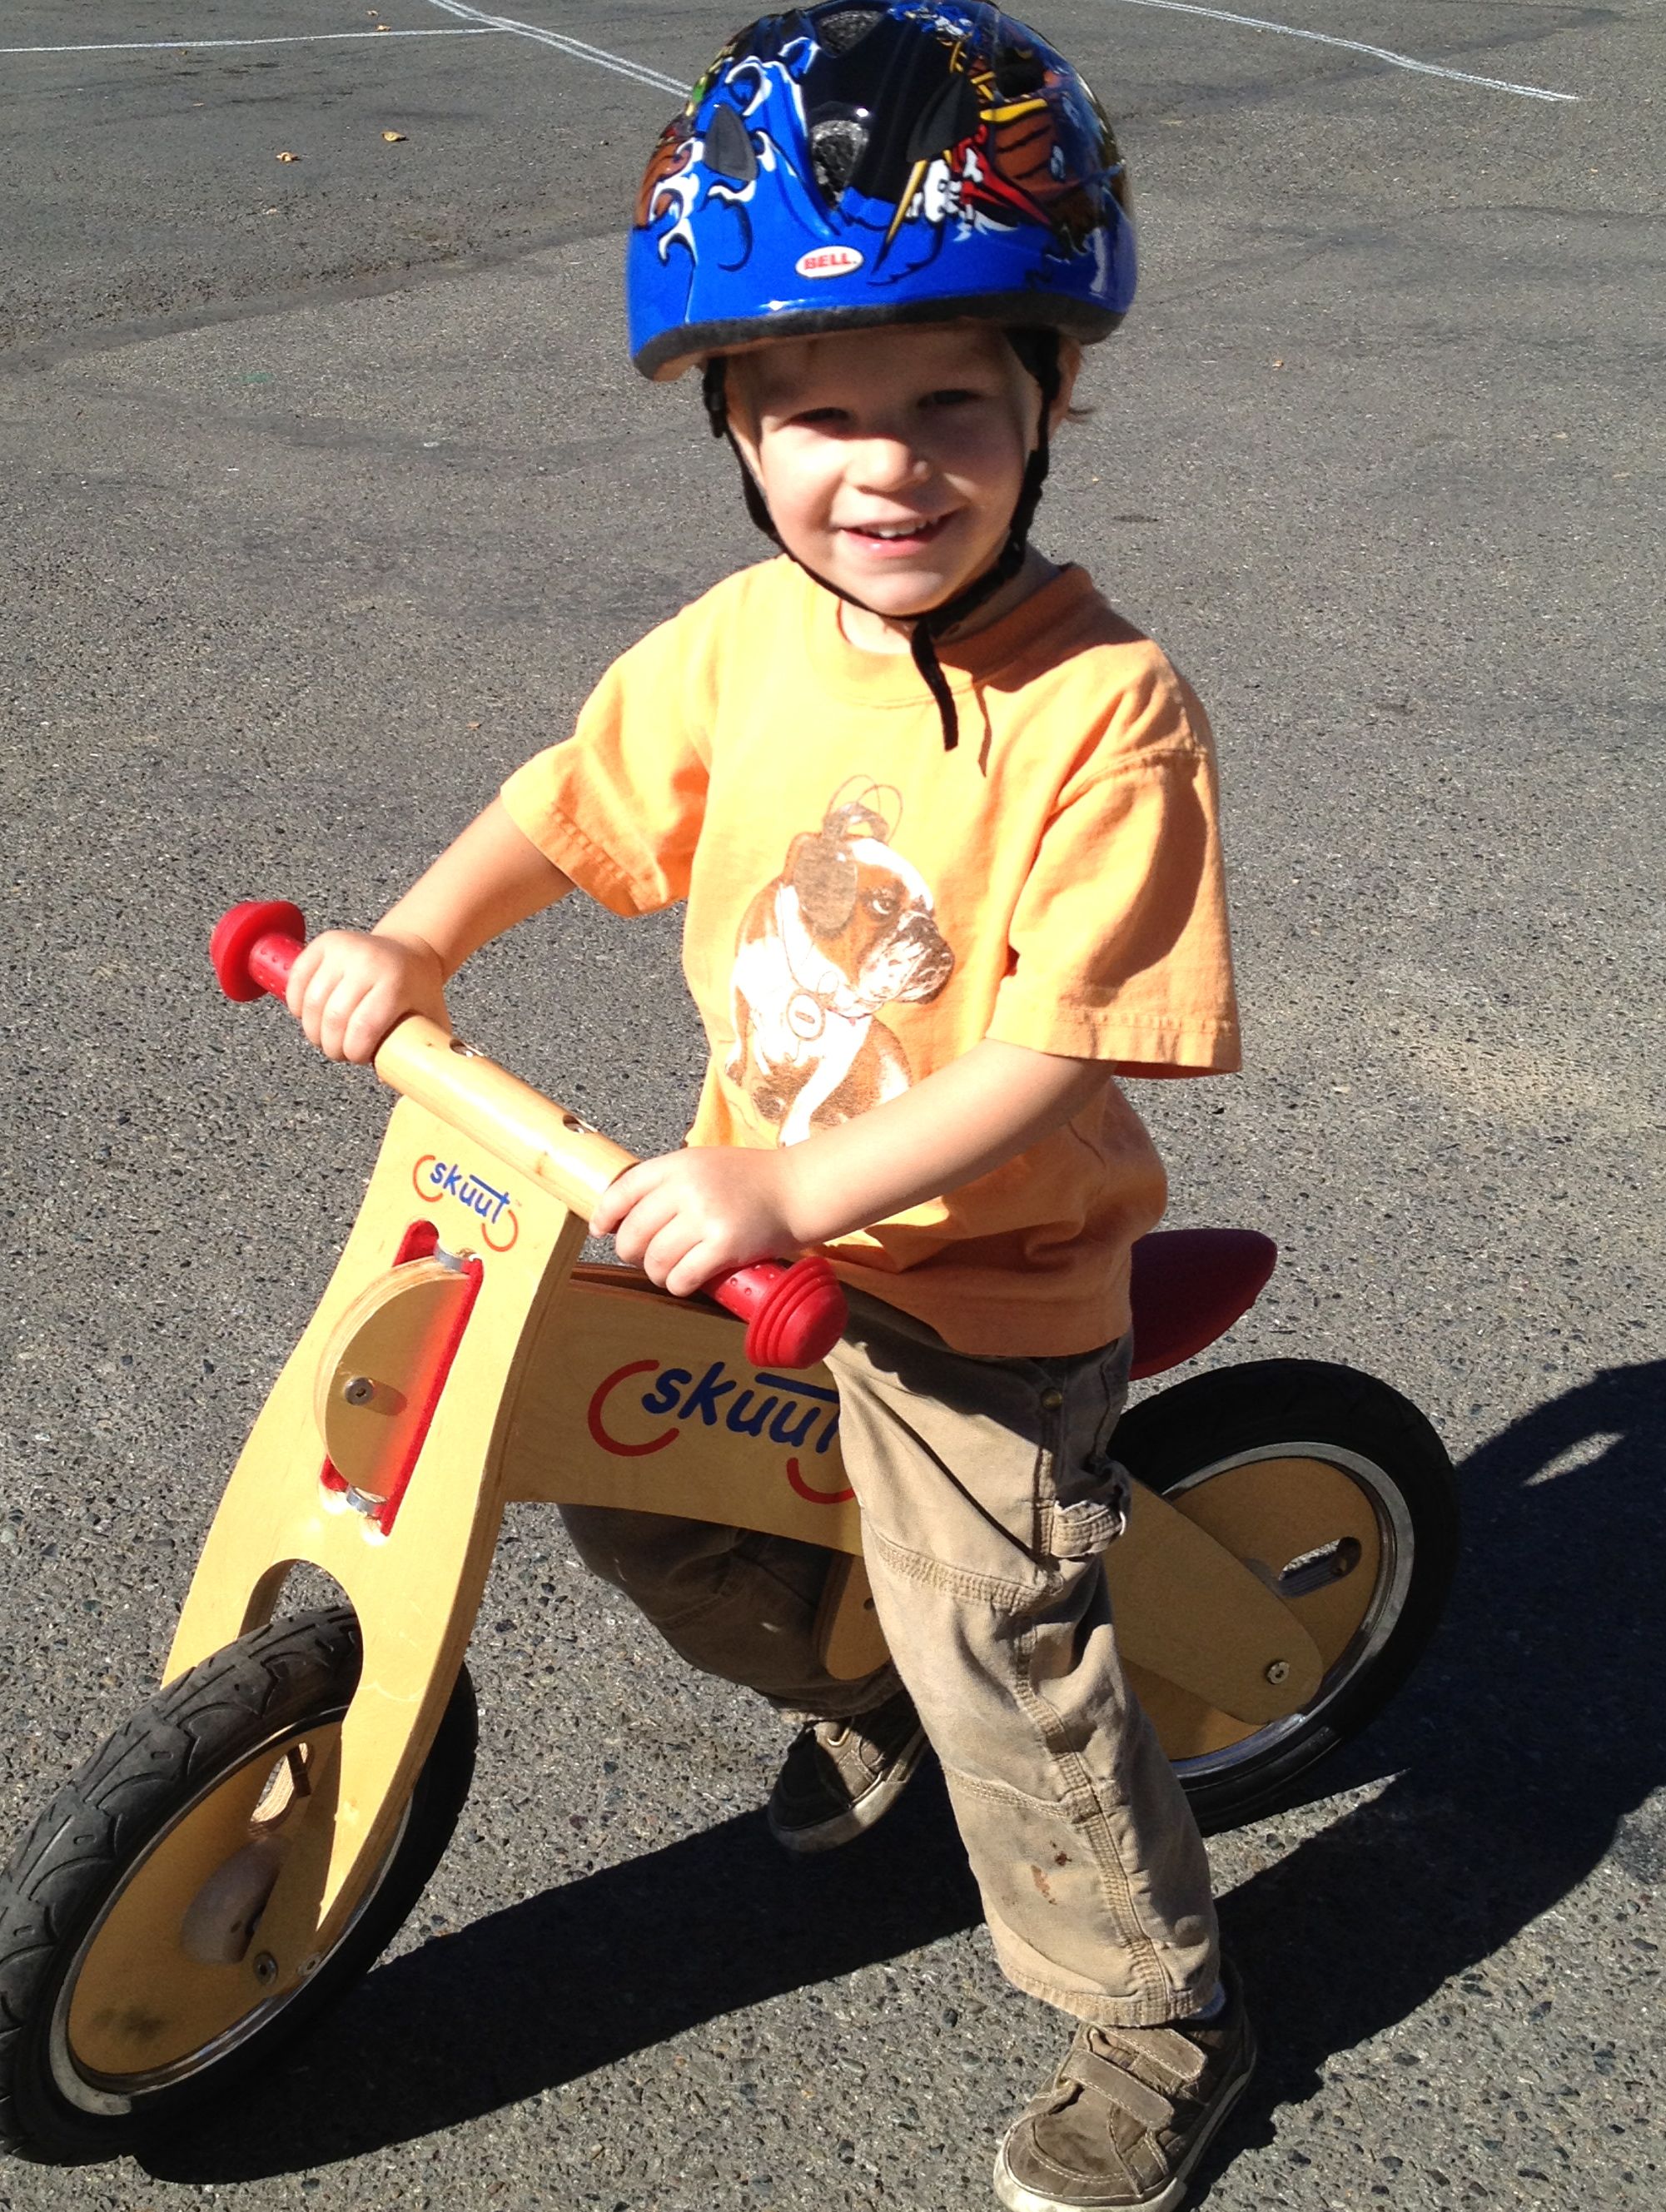 teaching to ride without training wheels